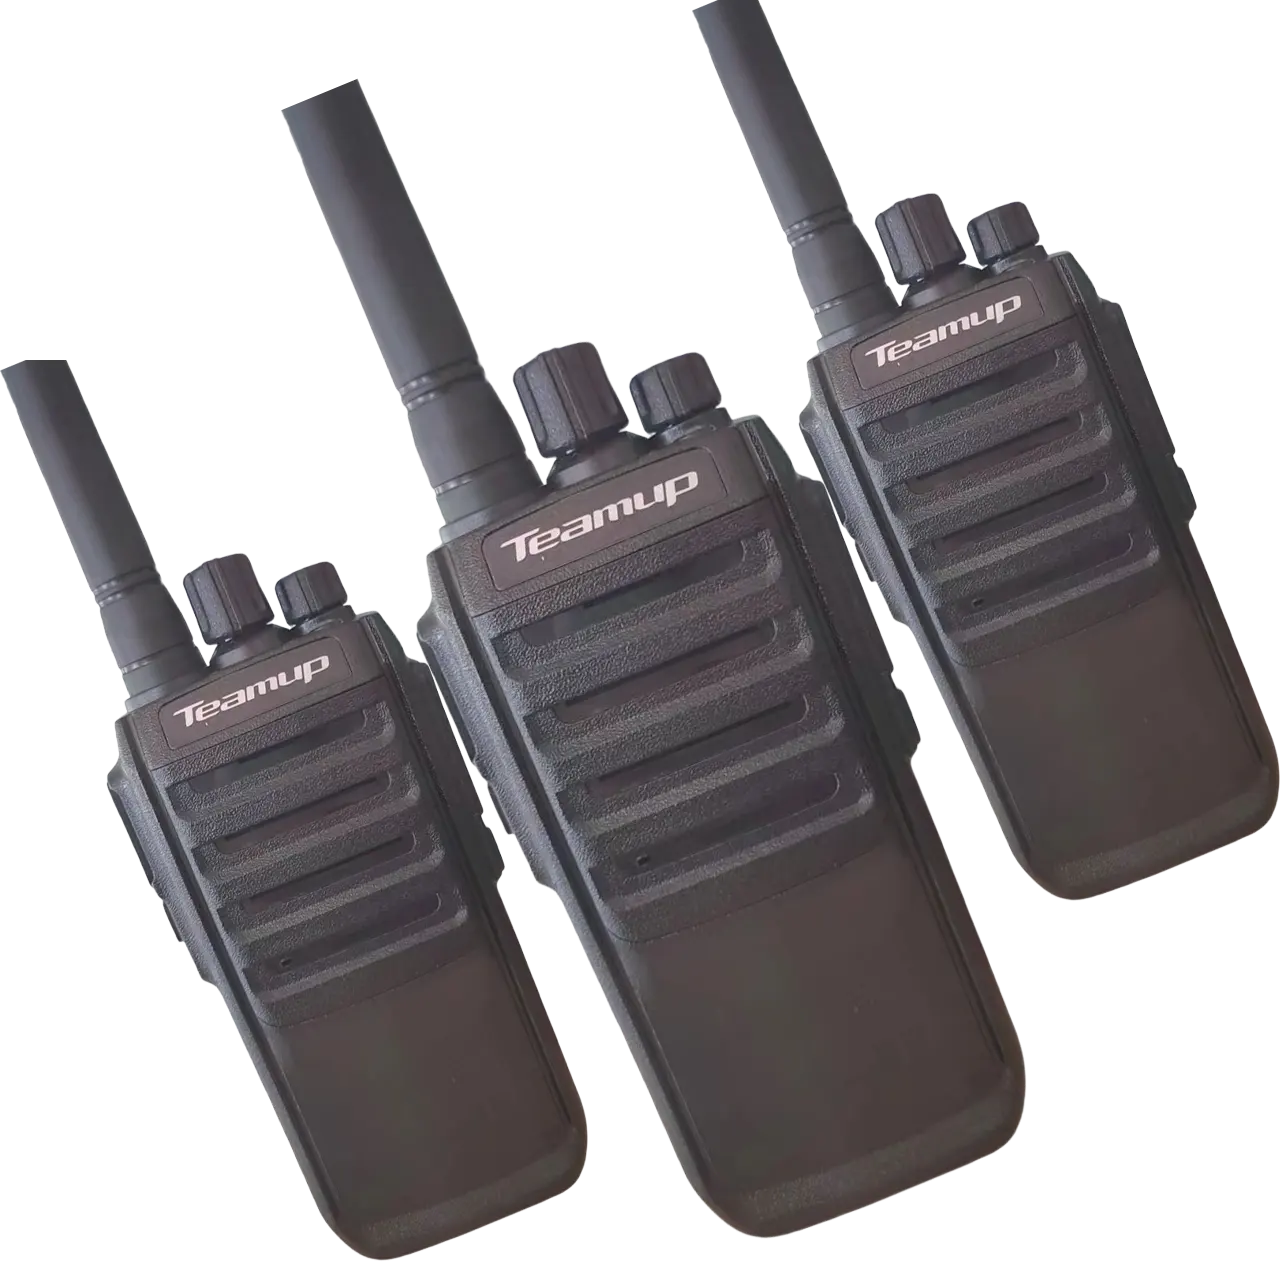 Teamup T525 Dual Band DMR IP67 Impermeable VHF UHF Martial Armed Services Walkie Talkie Handy